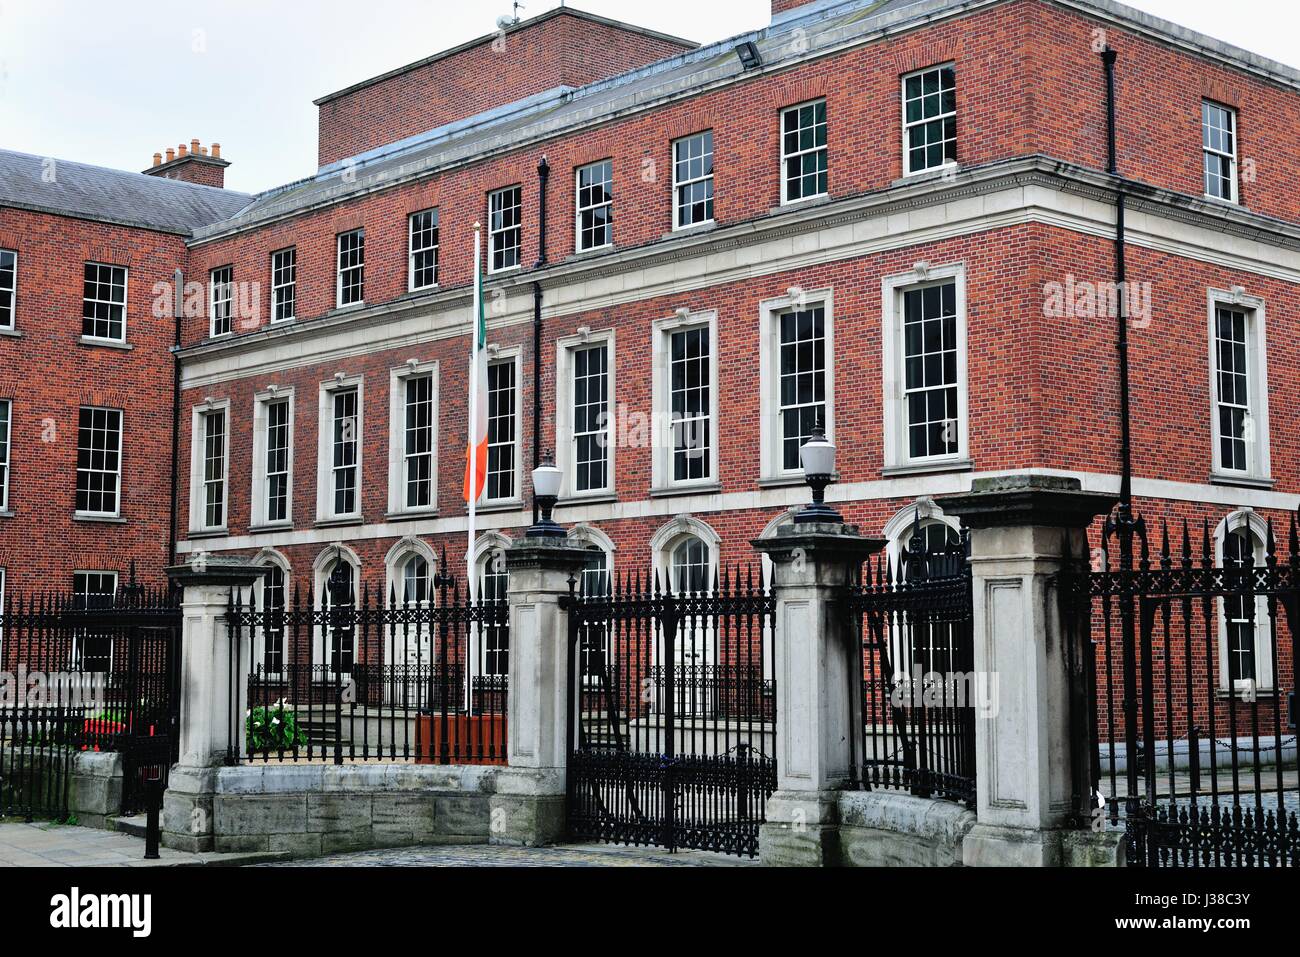 A gate entry and apartments at Dublin Castle, which was commissioned by England's King John in the 13th century. Dublin, Ireland. Stock Photo